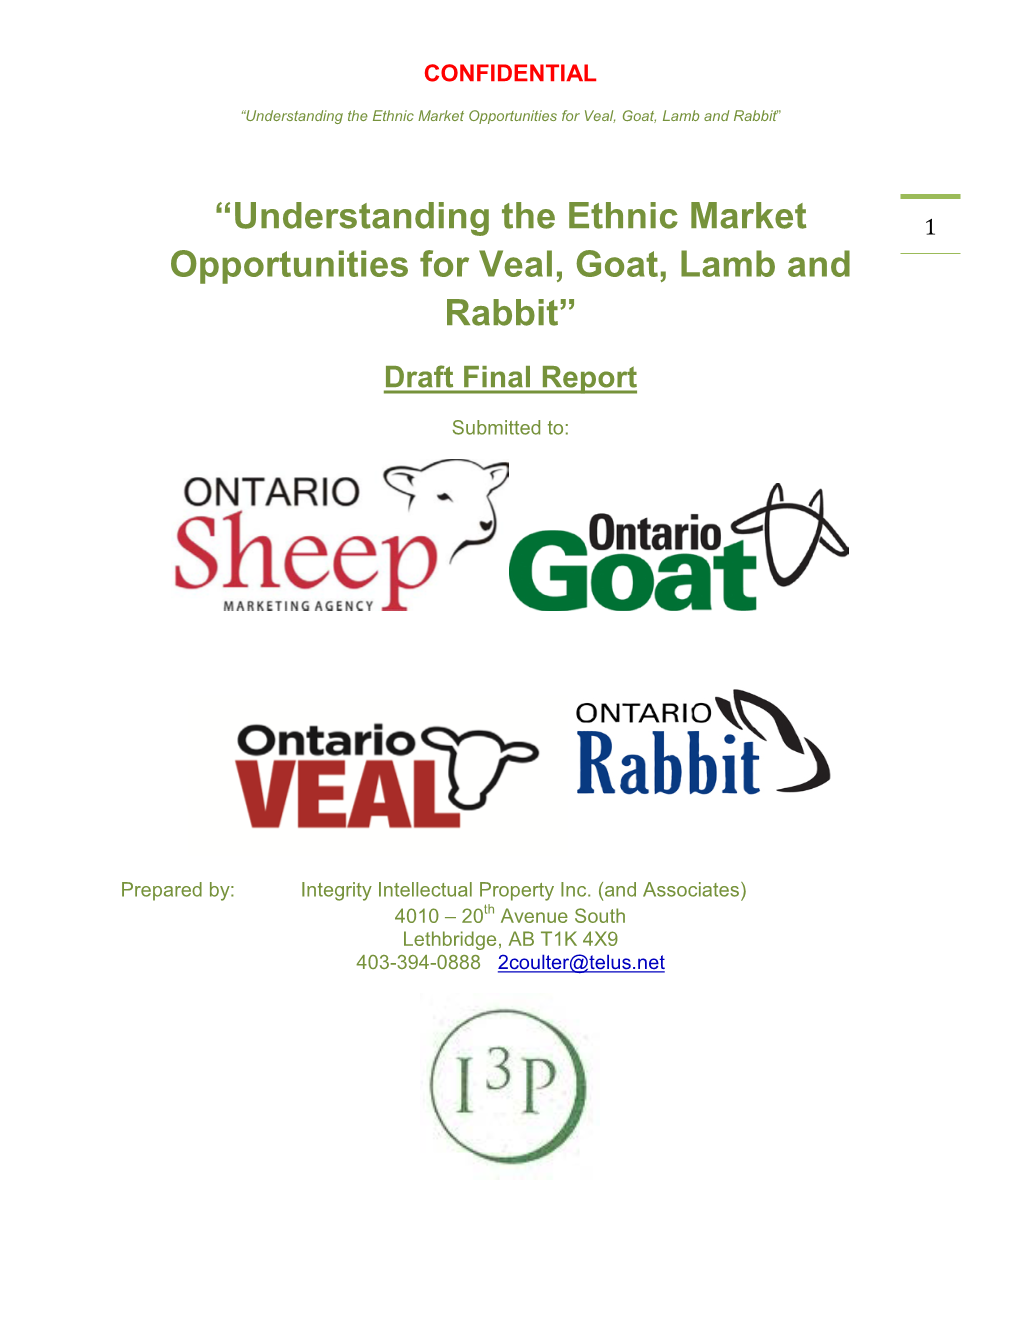 “Understanding the Ethnic Market Opportunities for Veal, Goat, Lamb and Rabbit”